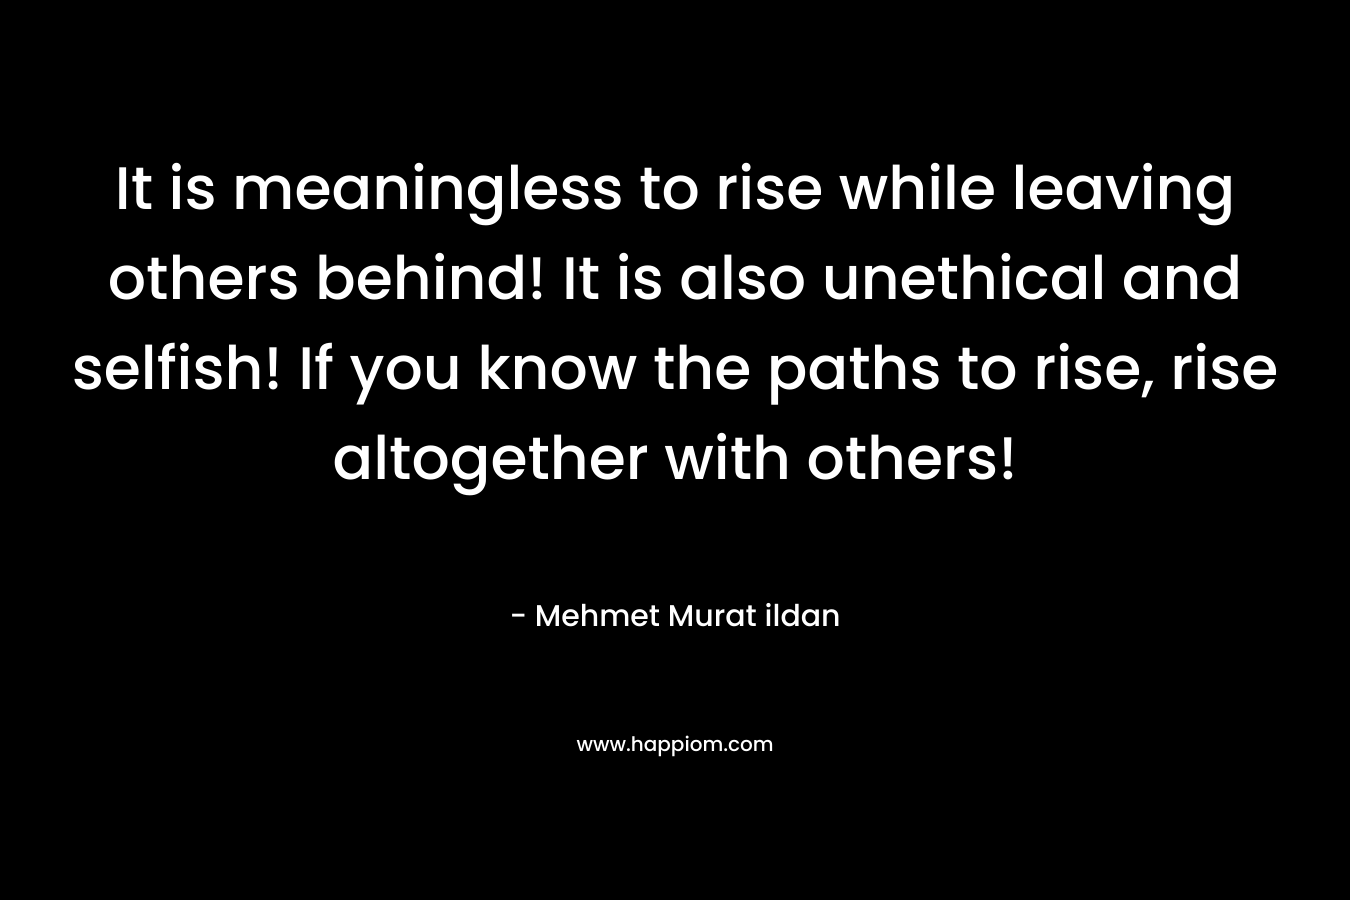 It is meaningless to rise while leaving others behind! It is also unethical and selfish! If you know the paths to rise, rise altogether with others! – Mehmet Murat ildan